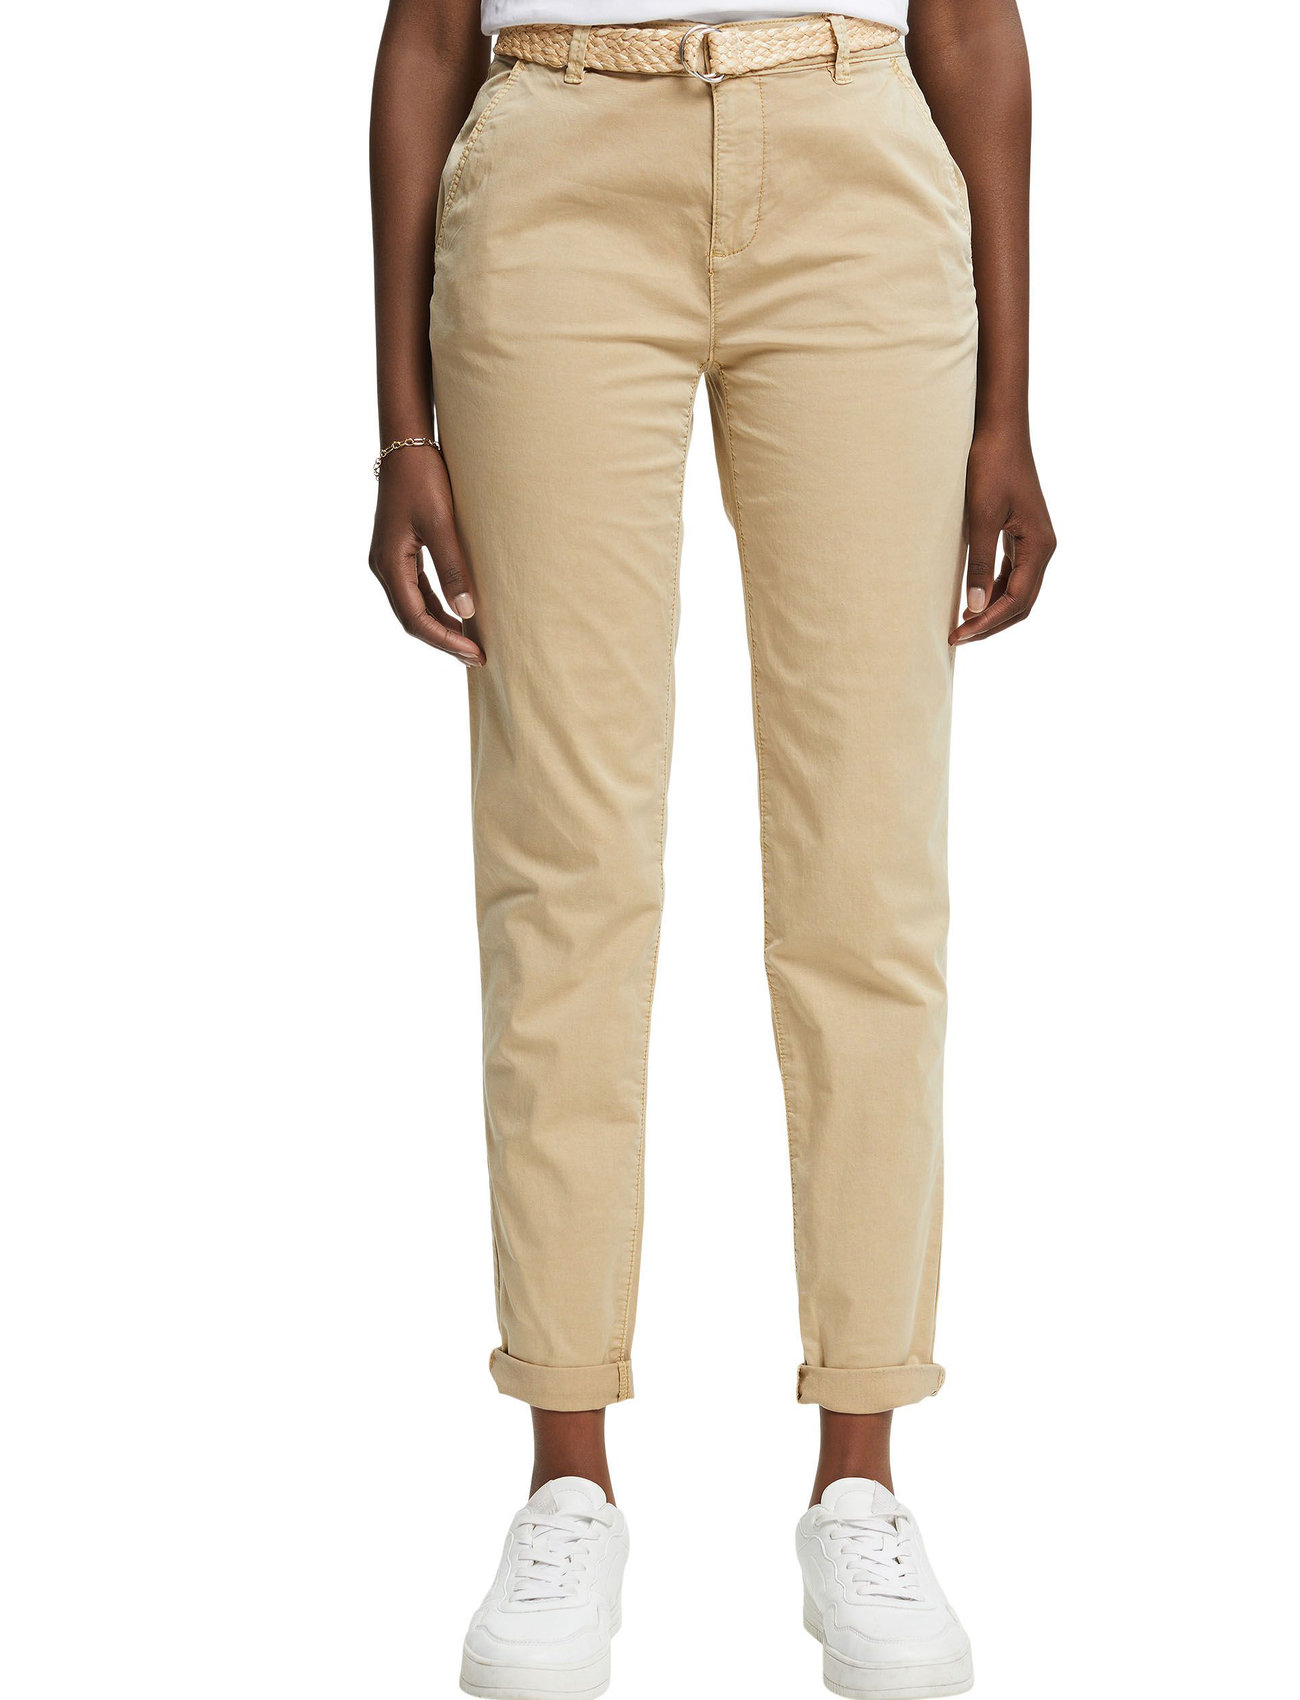 Esprit Casual - Cropped chinos - chinos - sand - 1